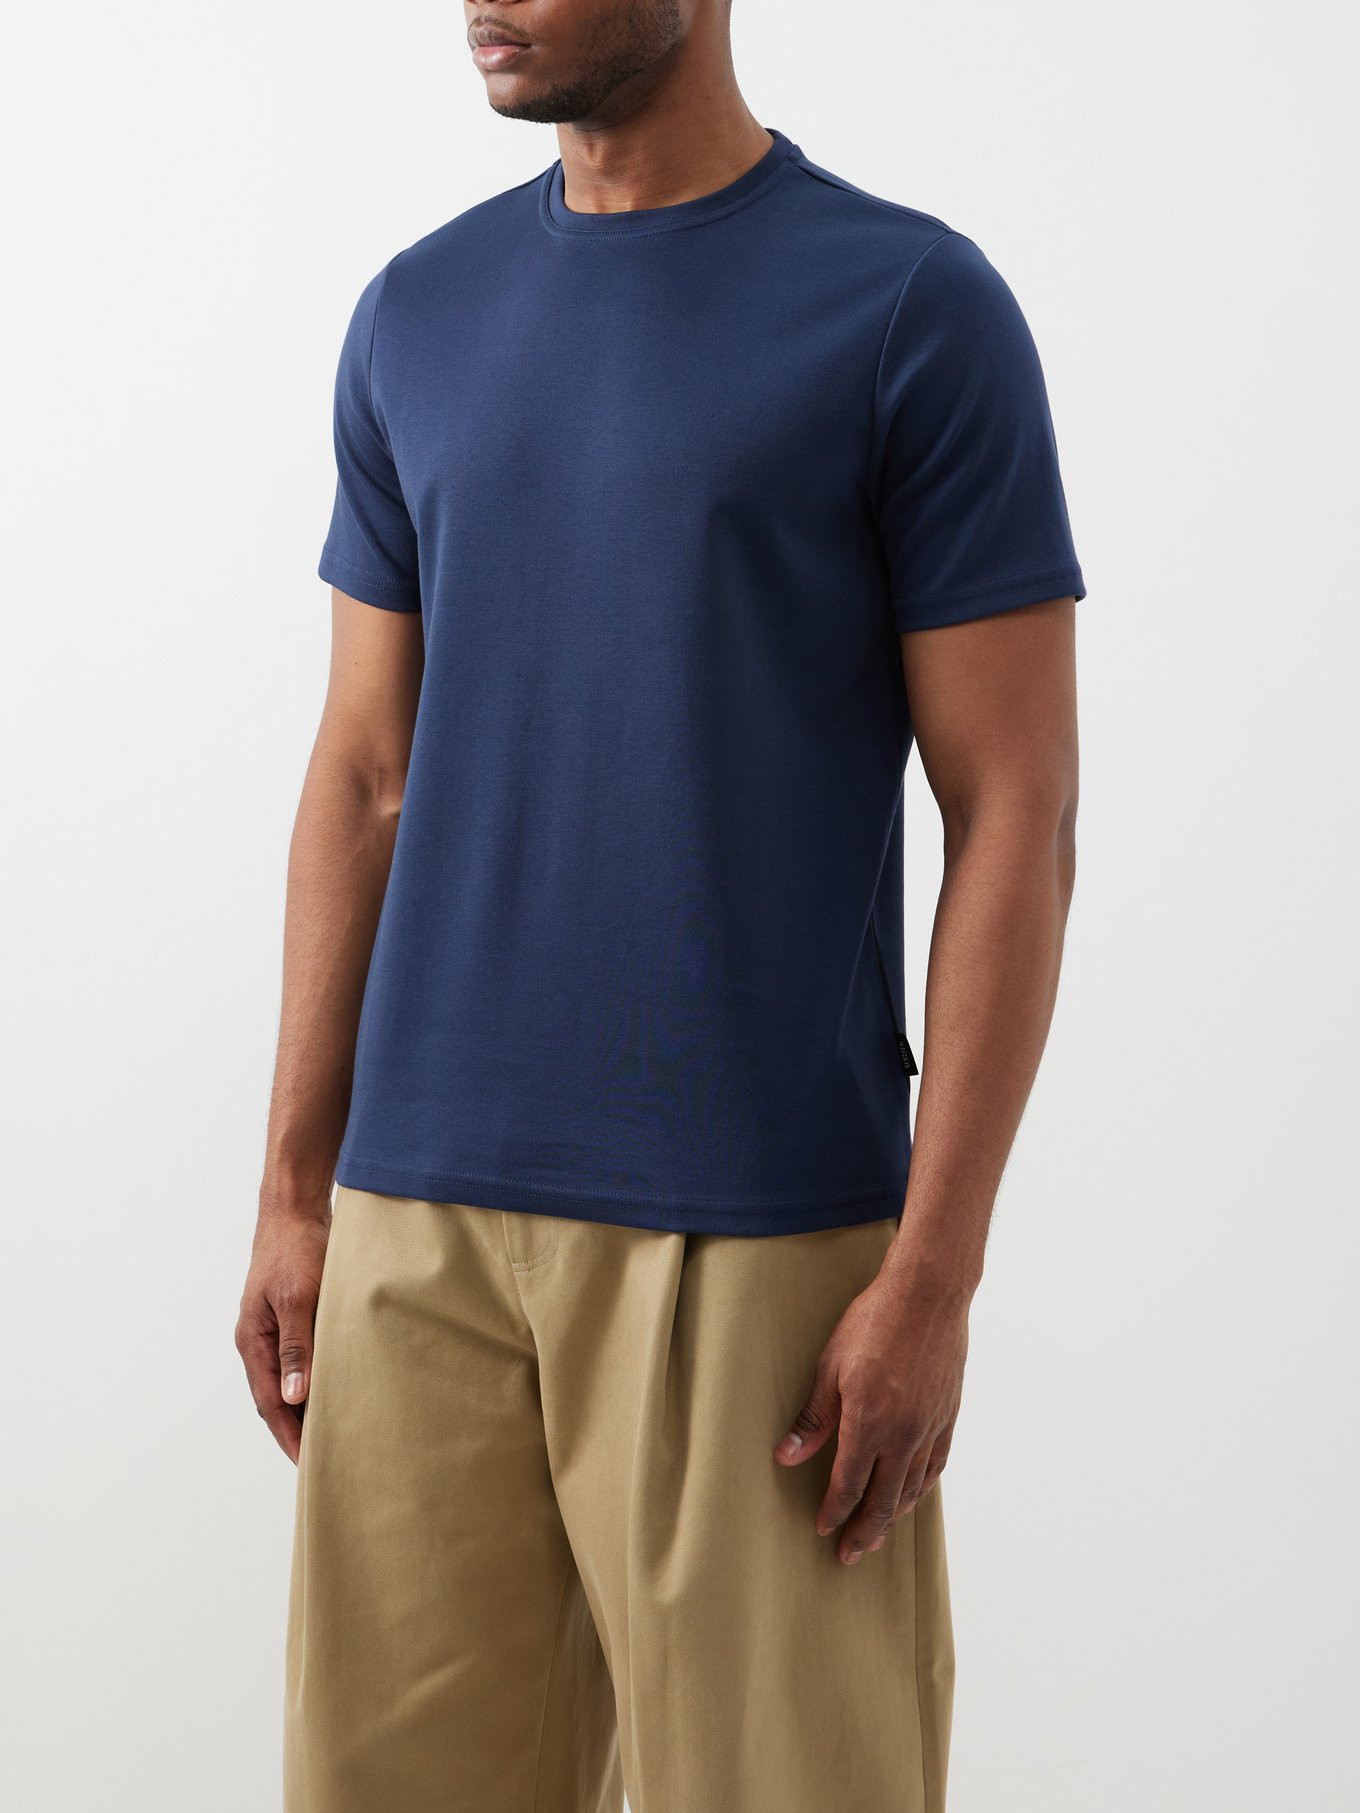 Navy Heavy organic-cotton jersey T-shirt | Oliver Spencer | MATCHES UK